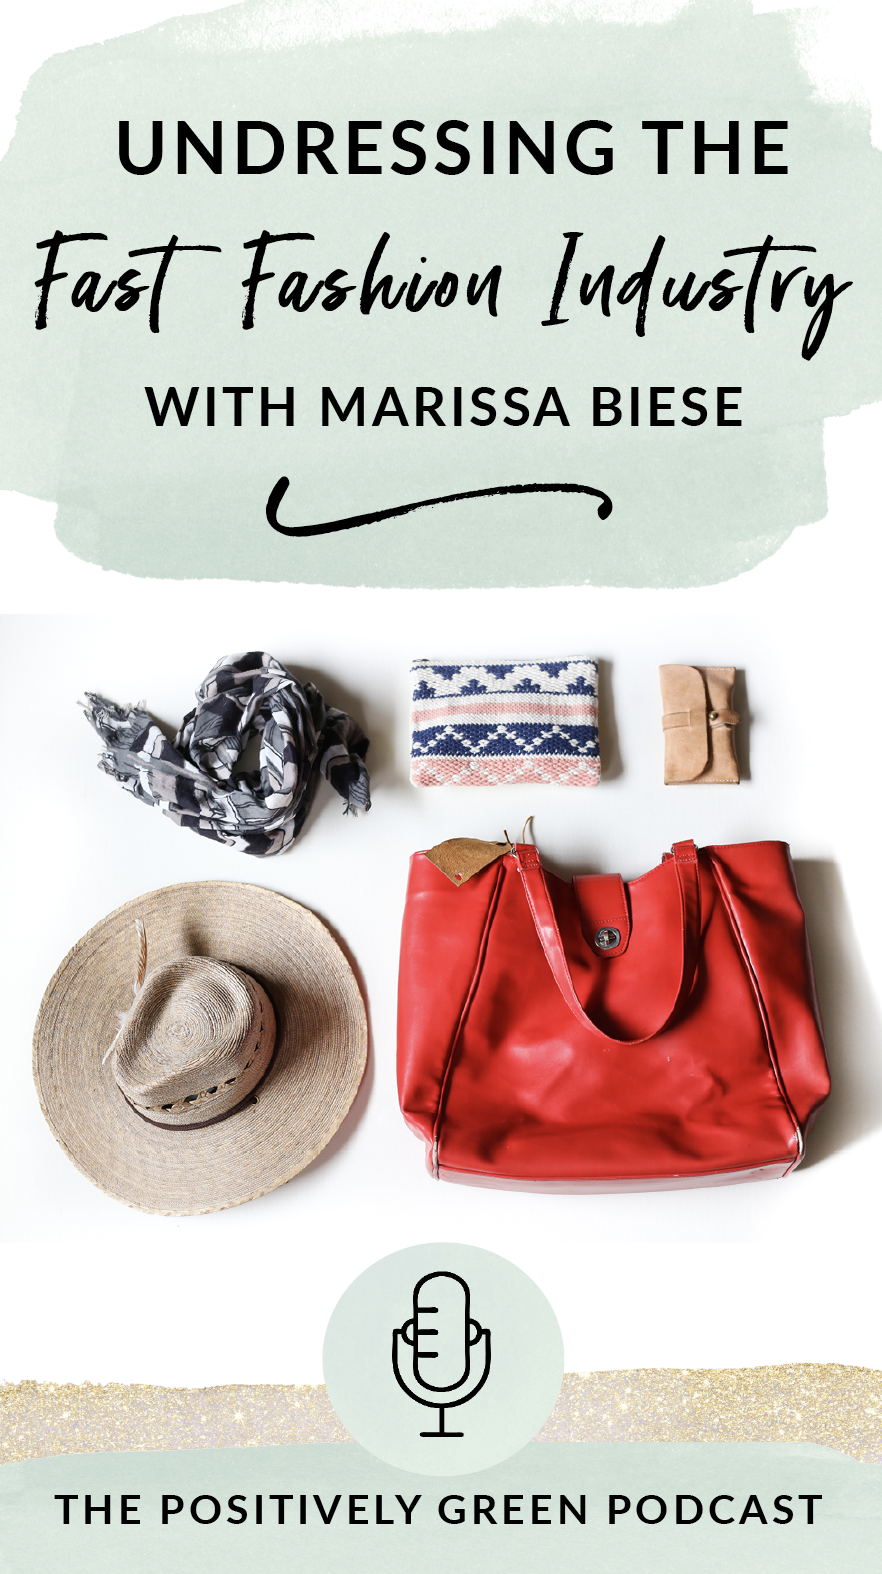 Undressing the fast fashion industry with Marissa Biese The Positively Green Podcast